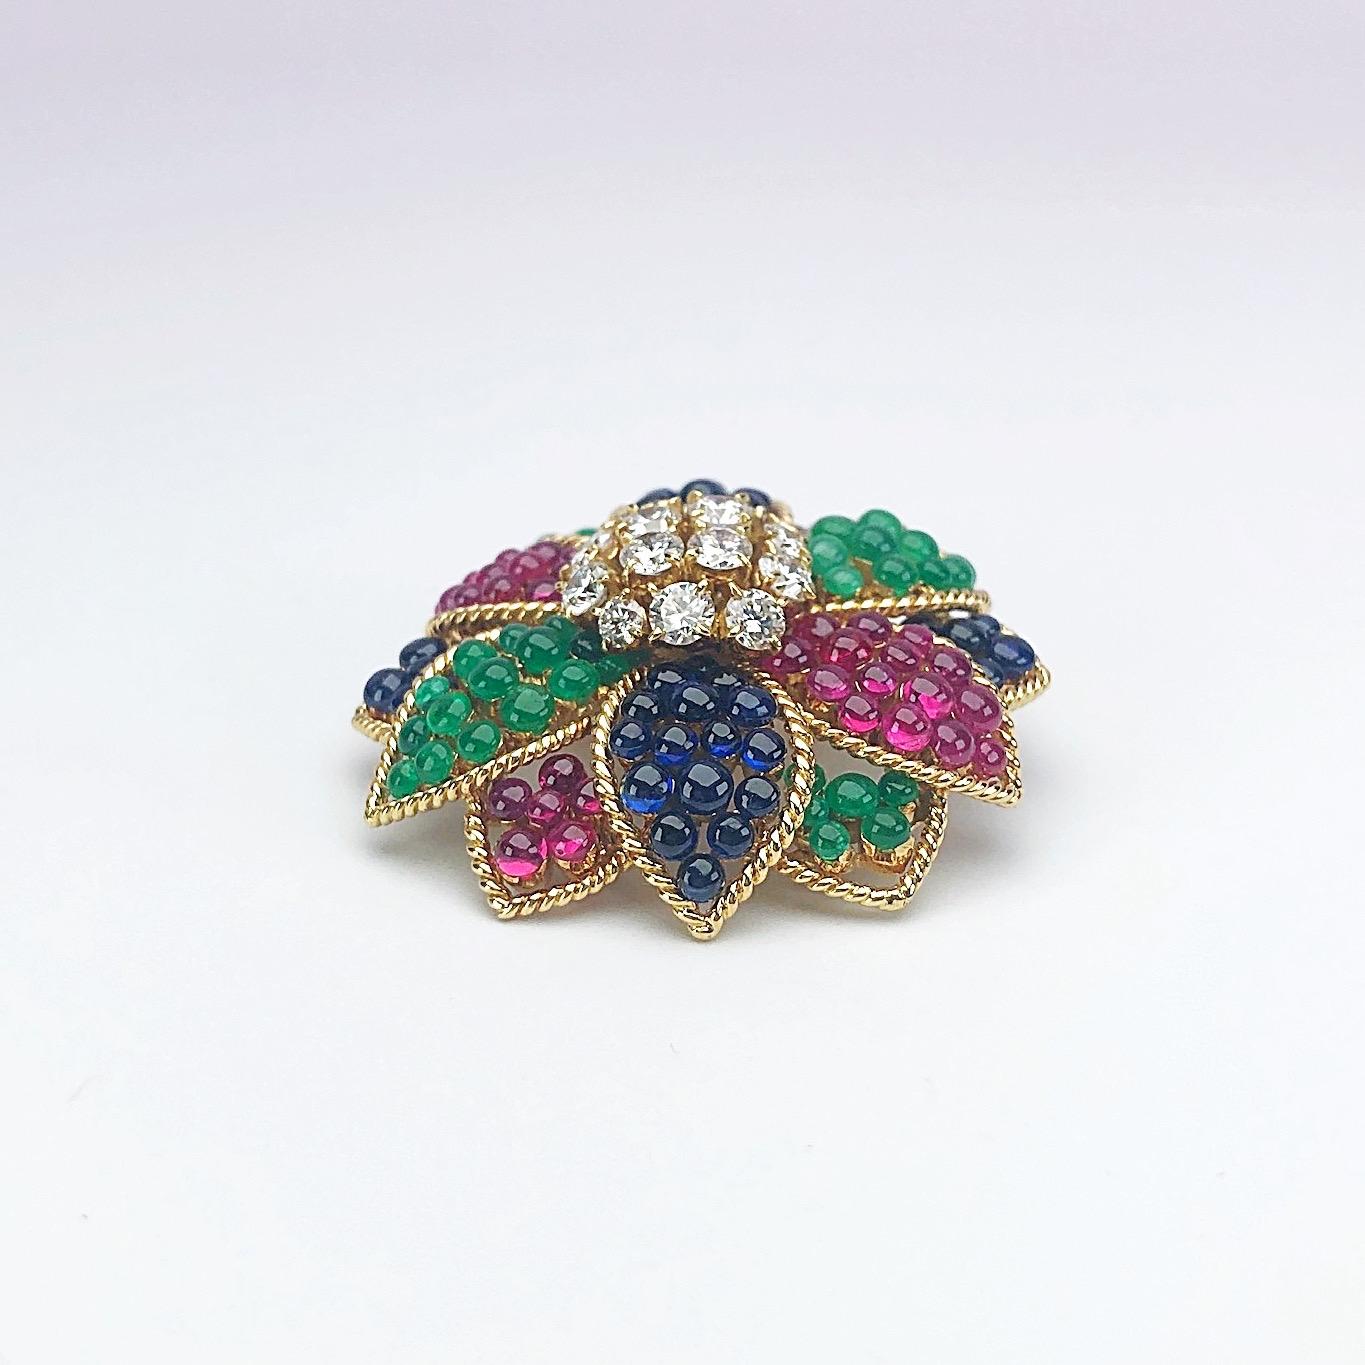 Contemporary Sabbadini 18 Karat Yellow Gold Flower Brooch with Diamonds and Beaded Gem Stones For Sale